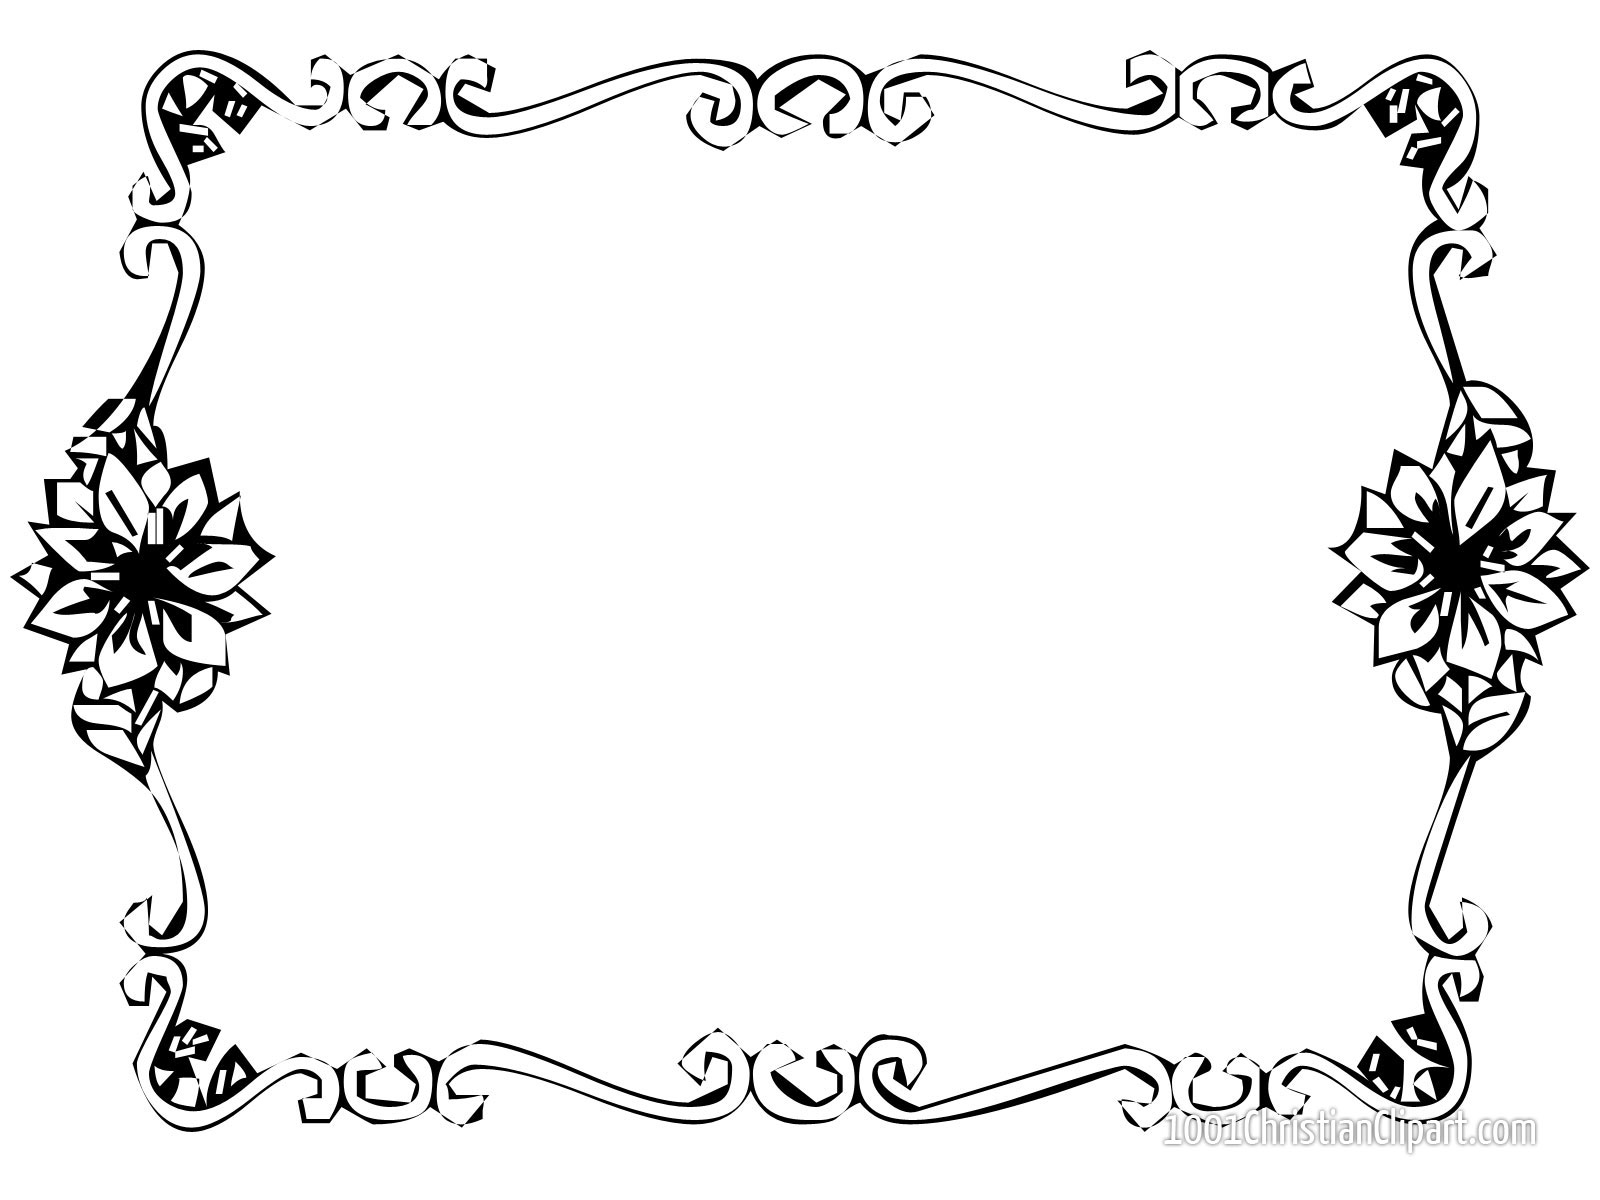 Border Design Images Free Download - Clipart library